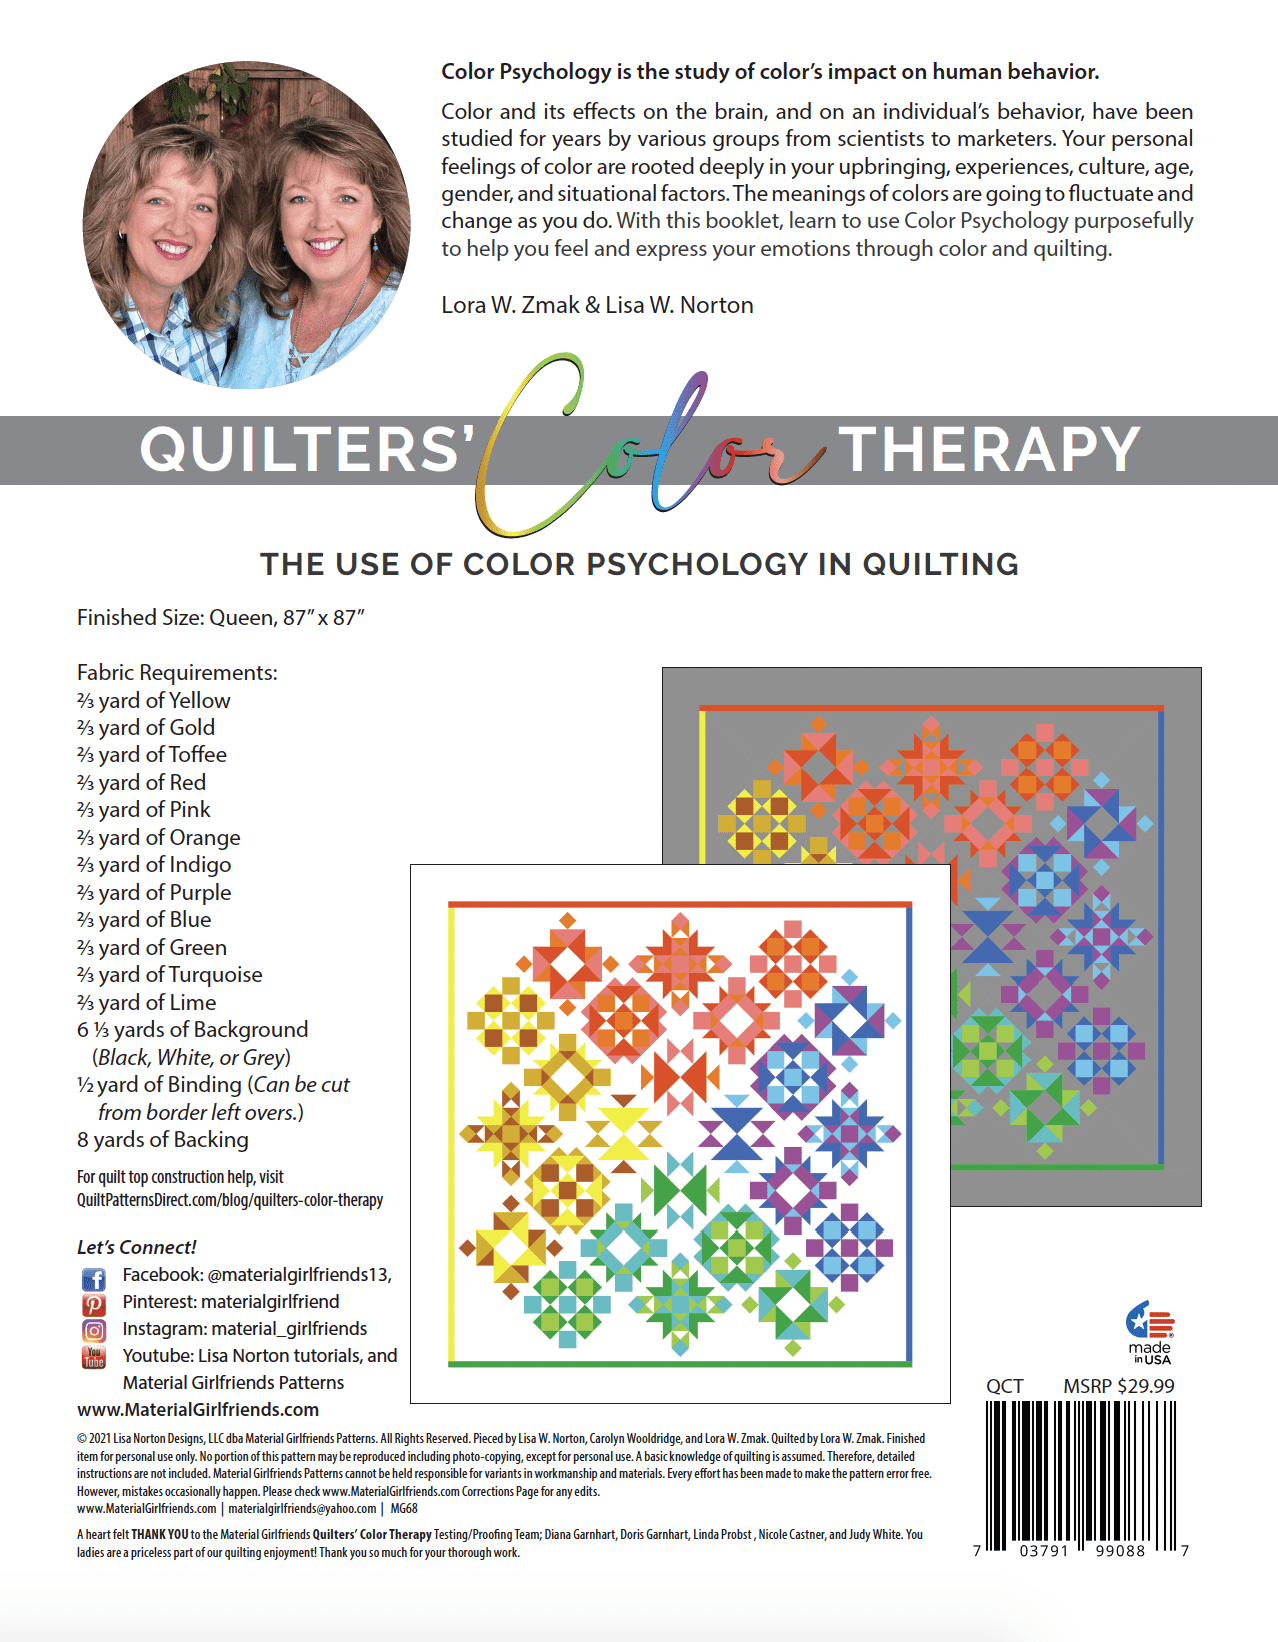 Quilters' Color Therapy Block E Tutorial by Material Girlfriends, Lora Zmak  and Lisa Norton 